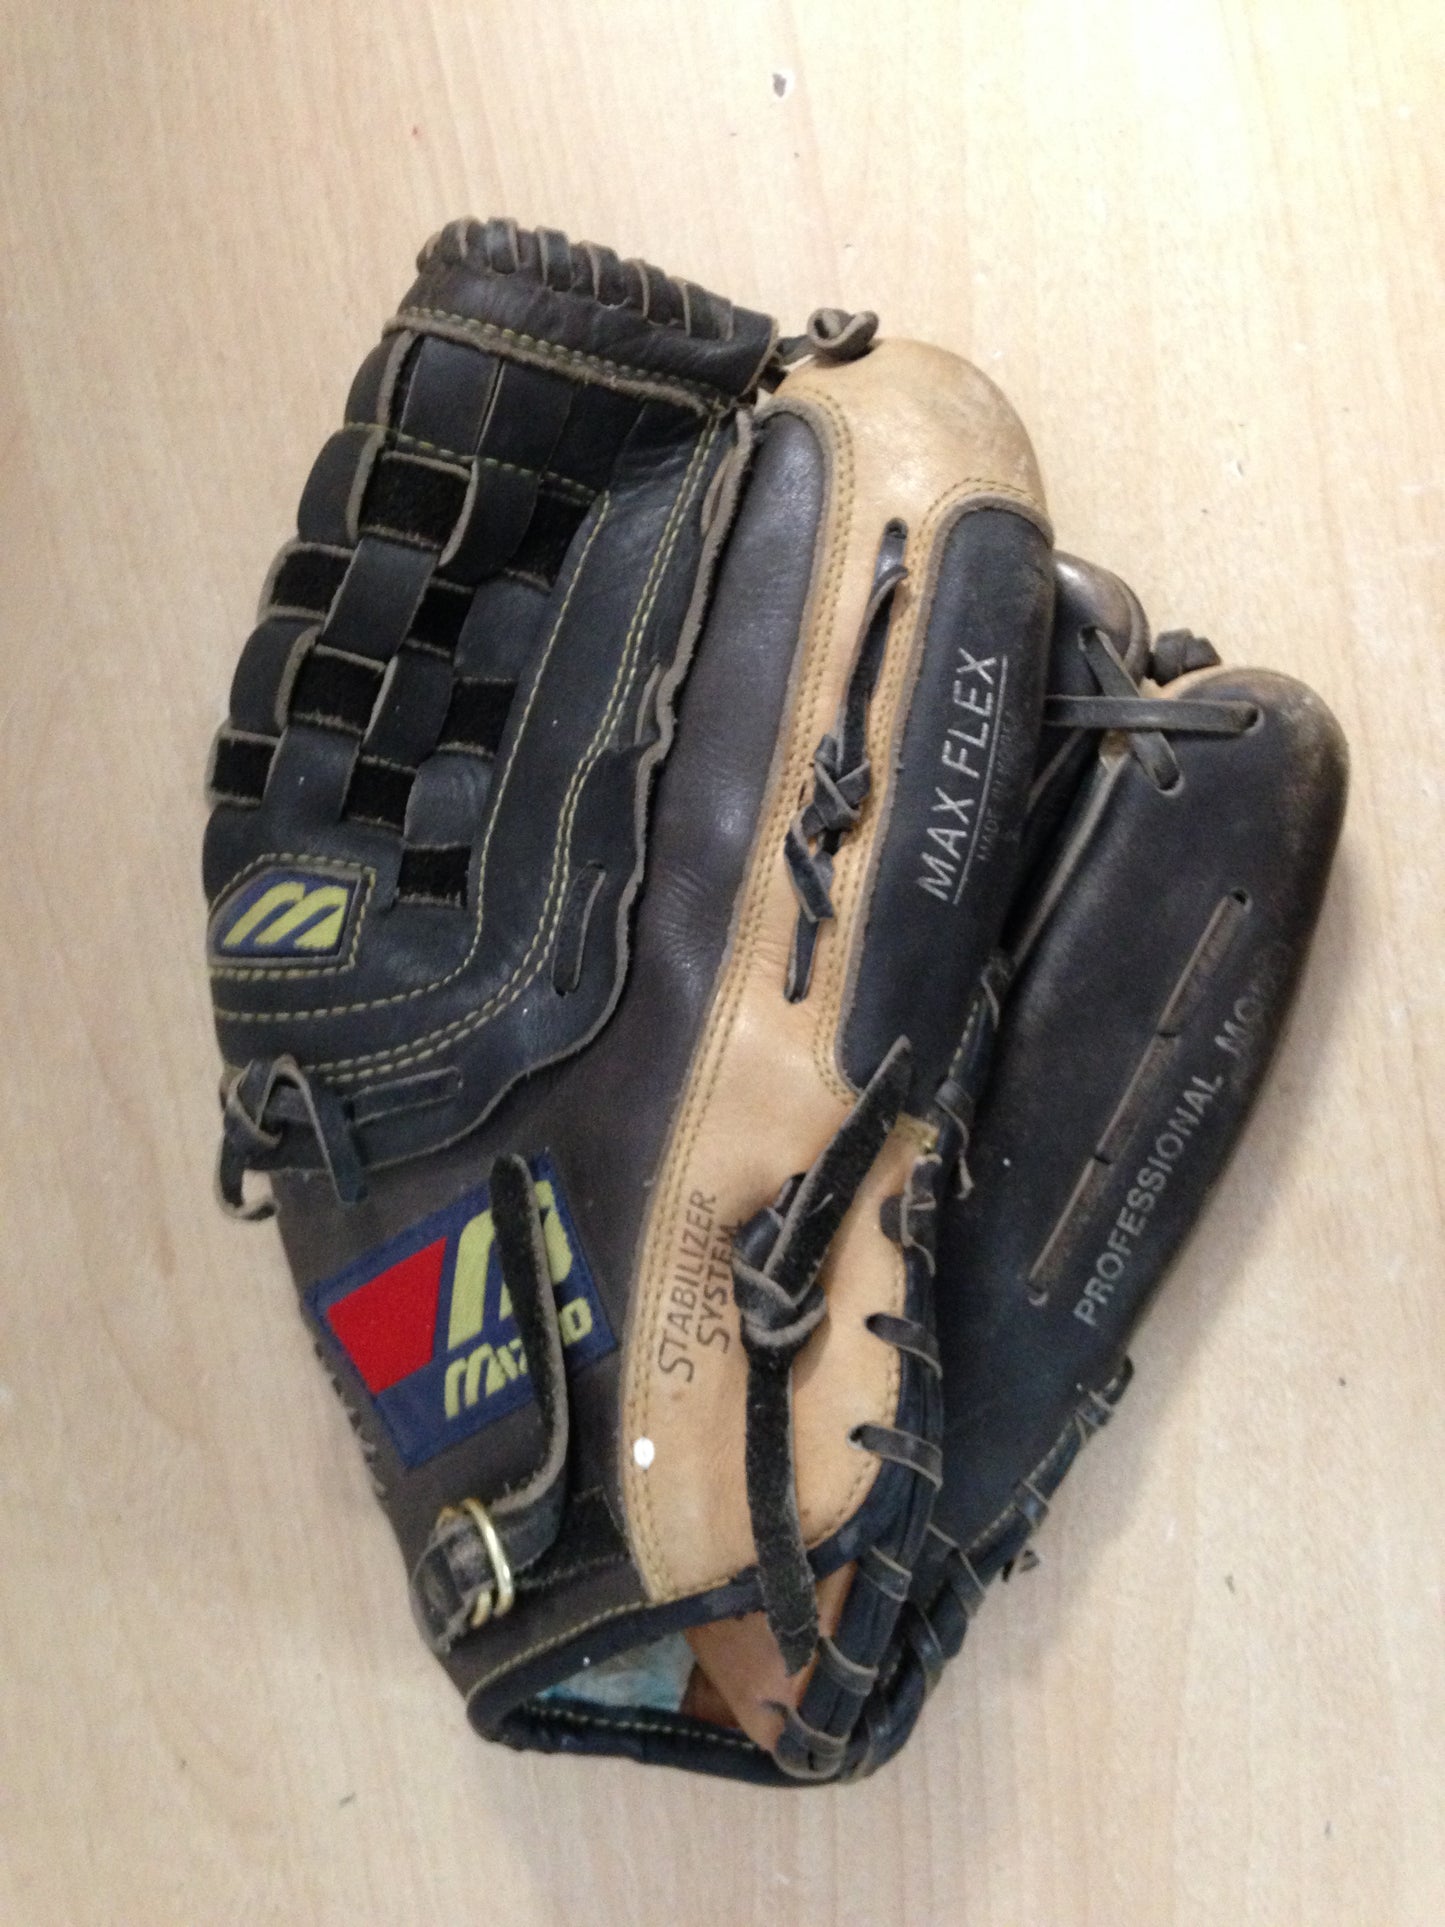 Baseball Glove Adult Size 12.5 inch Mizuno Leather Black Tan Fits on Left Hand